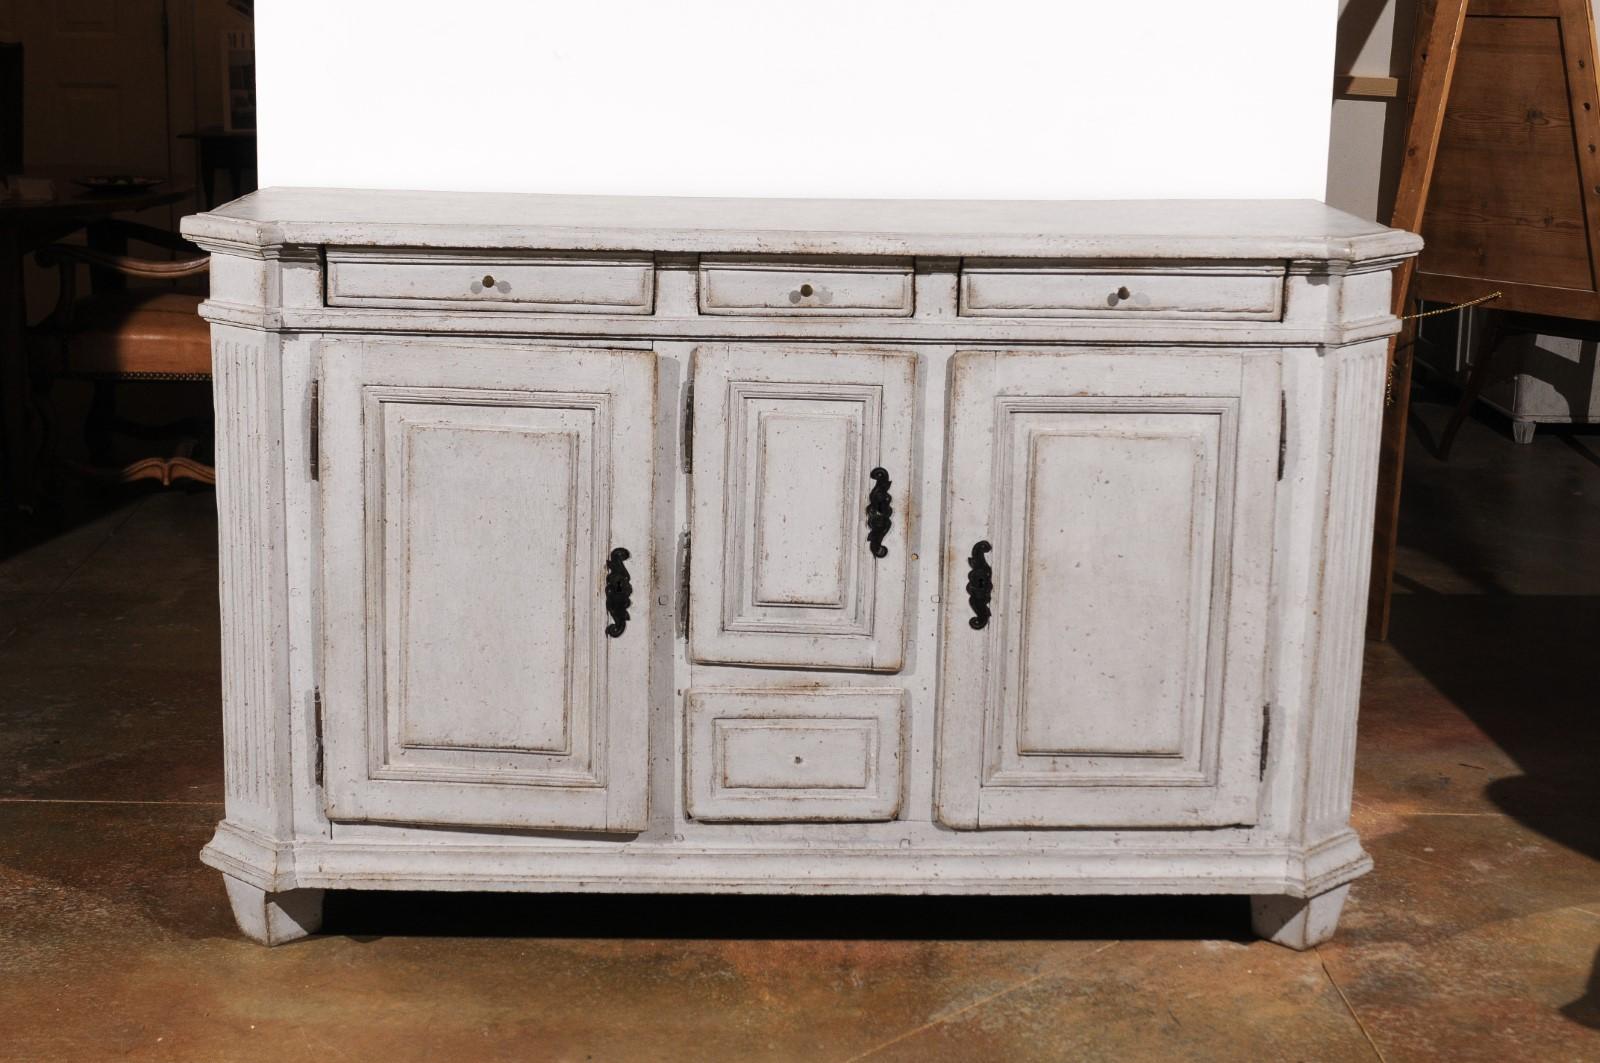 A Swedish Gustavian period painted wood sideboard from the late 18th century, with canted side posts, four drawers and three doors. Born in Sweden during the early years of King Gustav III's reign, this painted sideboard features a rectangular top